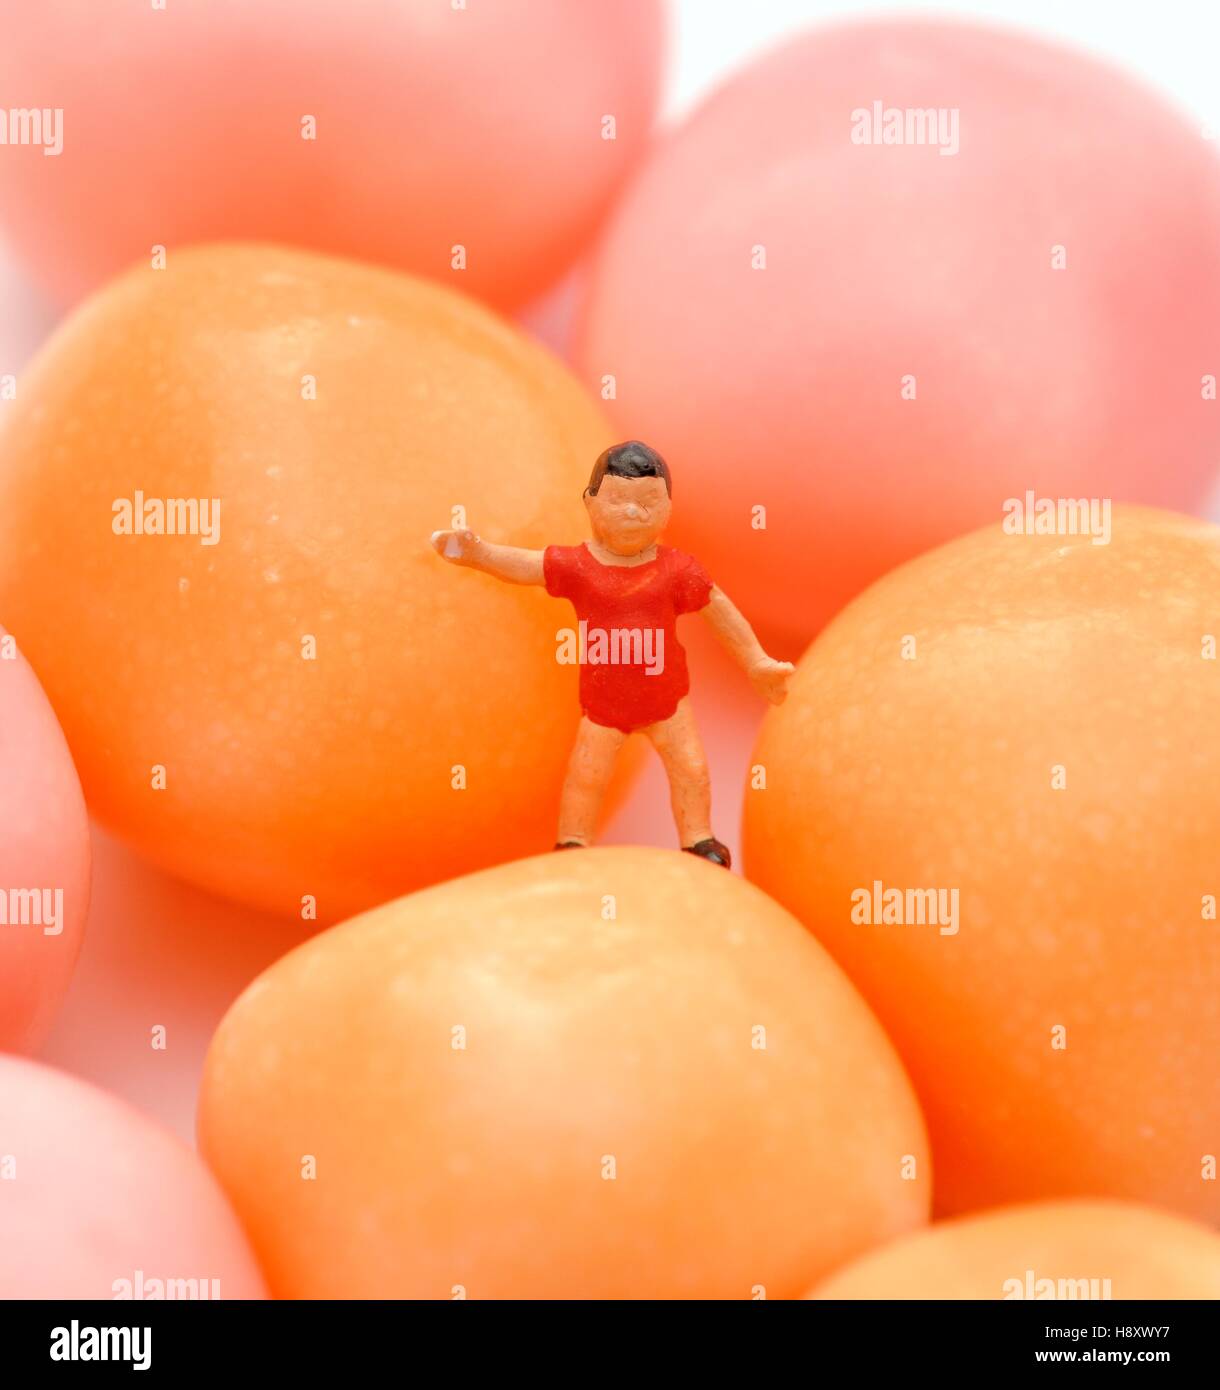 Miniature figurine young boy standing next to candy sweets Stock Photo